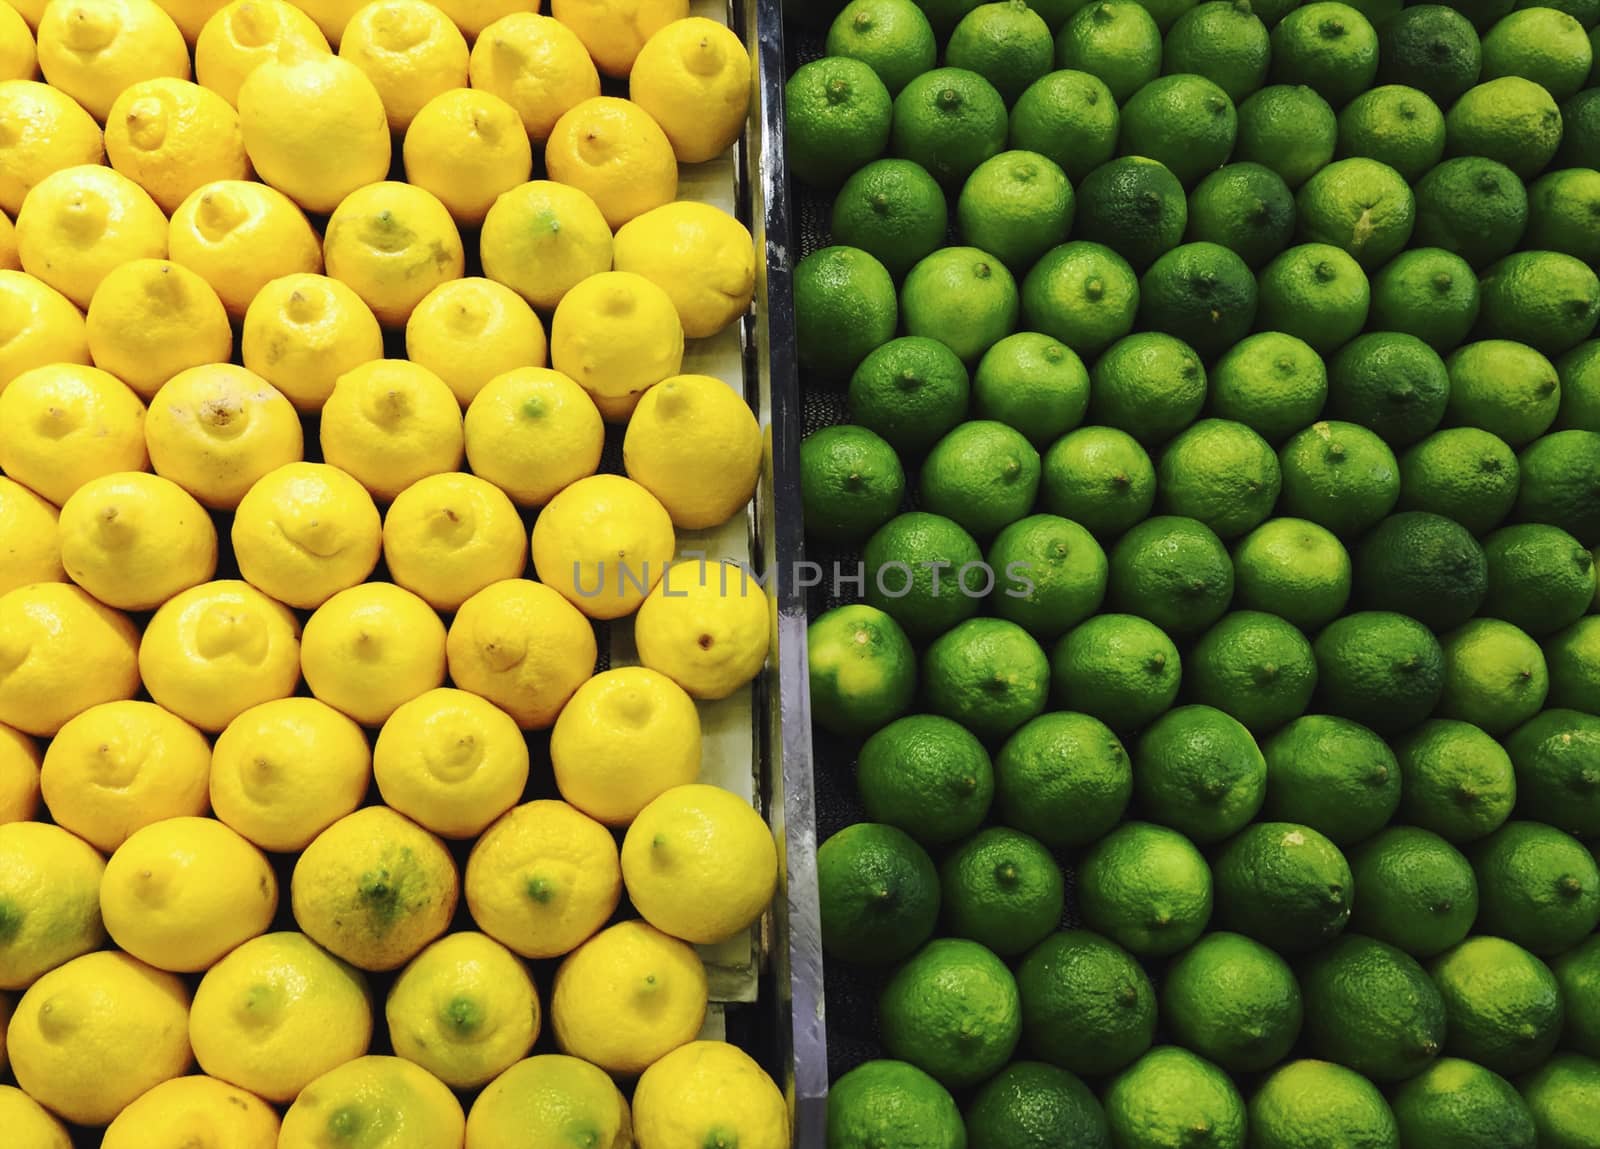 Lemons and limes by instinia